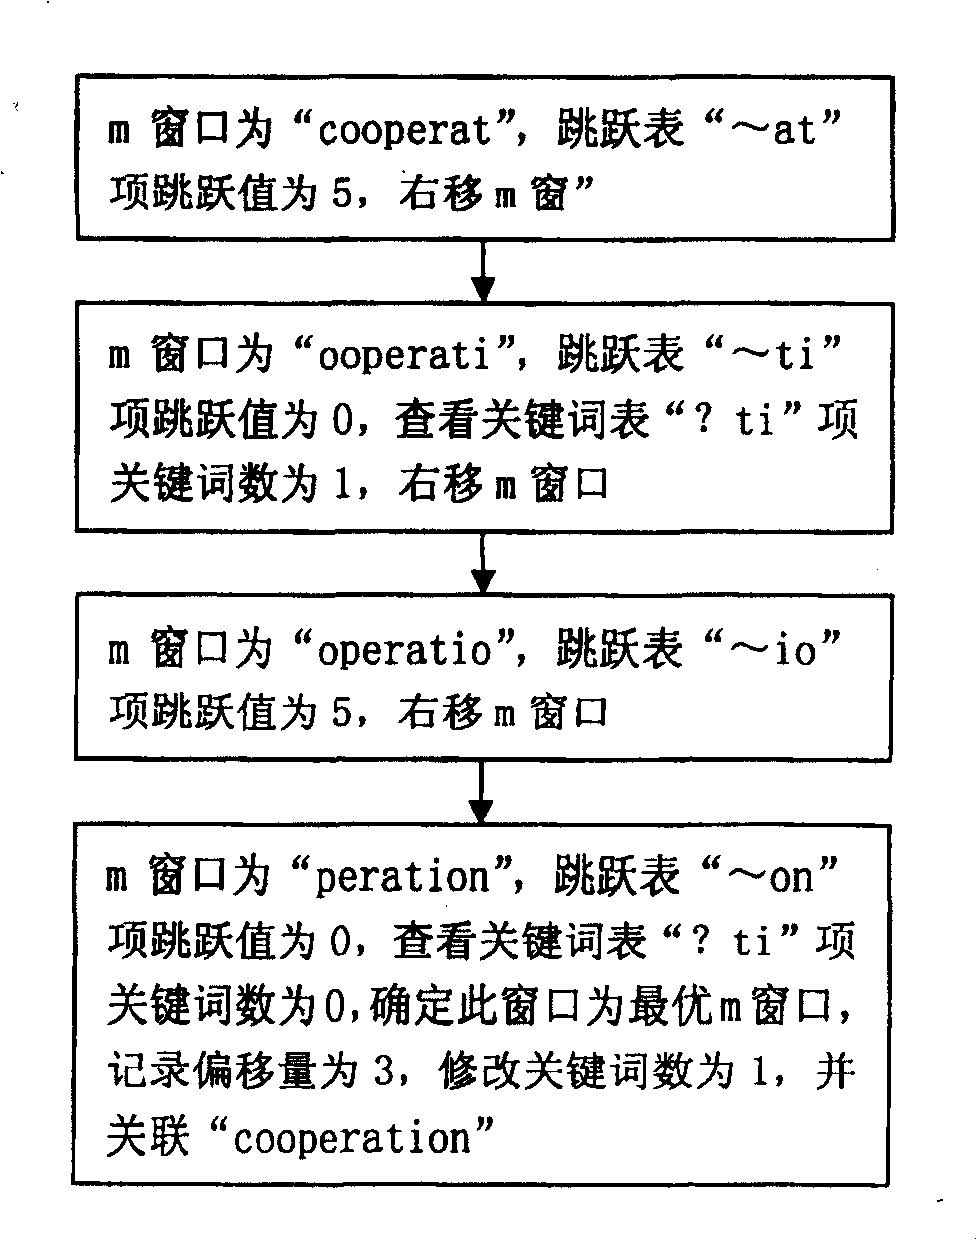 Large-scale and multi-key word matching method for text or network content analysis